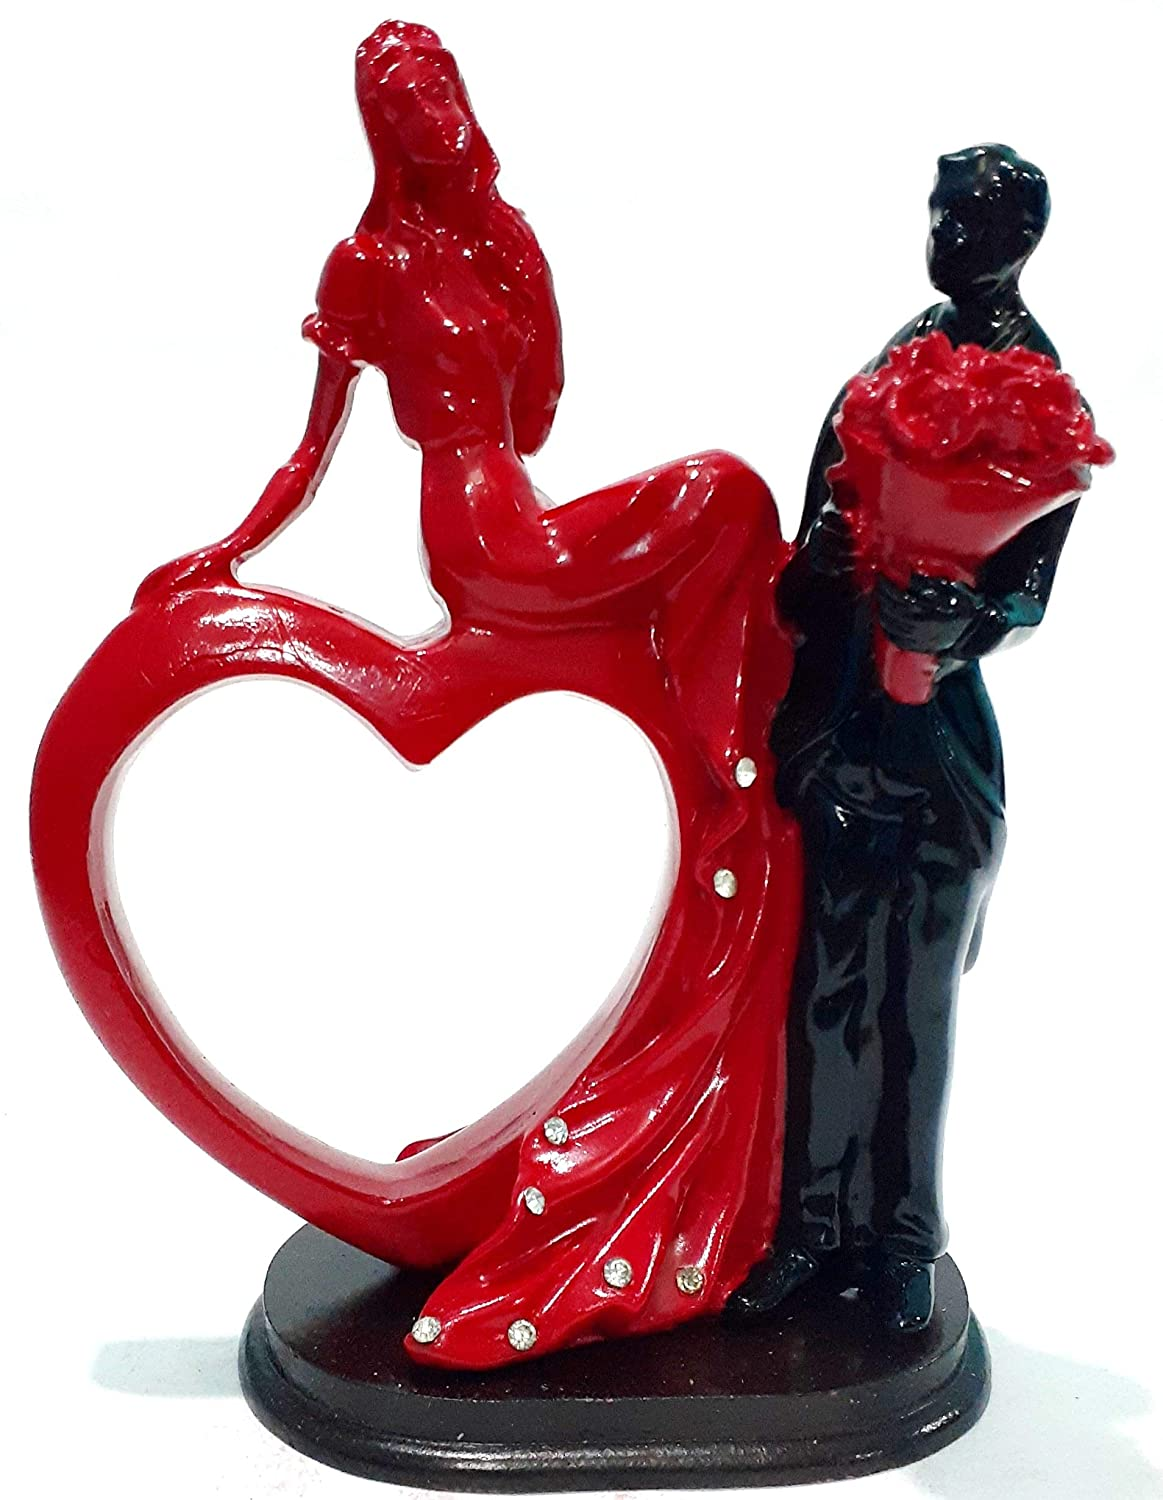 TIED RIBBONS Valentine's Romantic Love Couple Idol Statue Gift Set for  Girlfriend Boyfriend Decorative Showpiece - 27 cm Price in India - Buy TIED  RIBBONS Valentine's Romantic Love Couple Idol Statue Gift